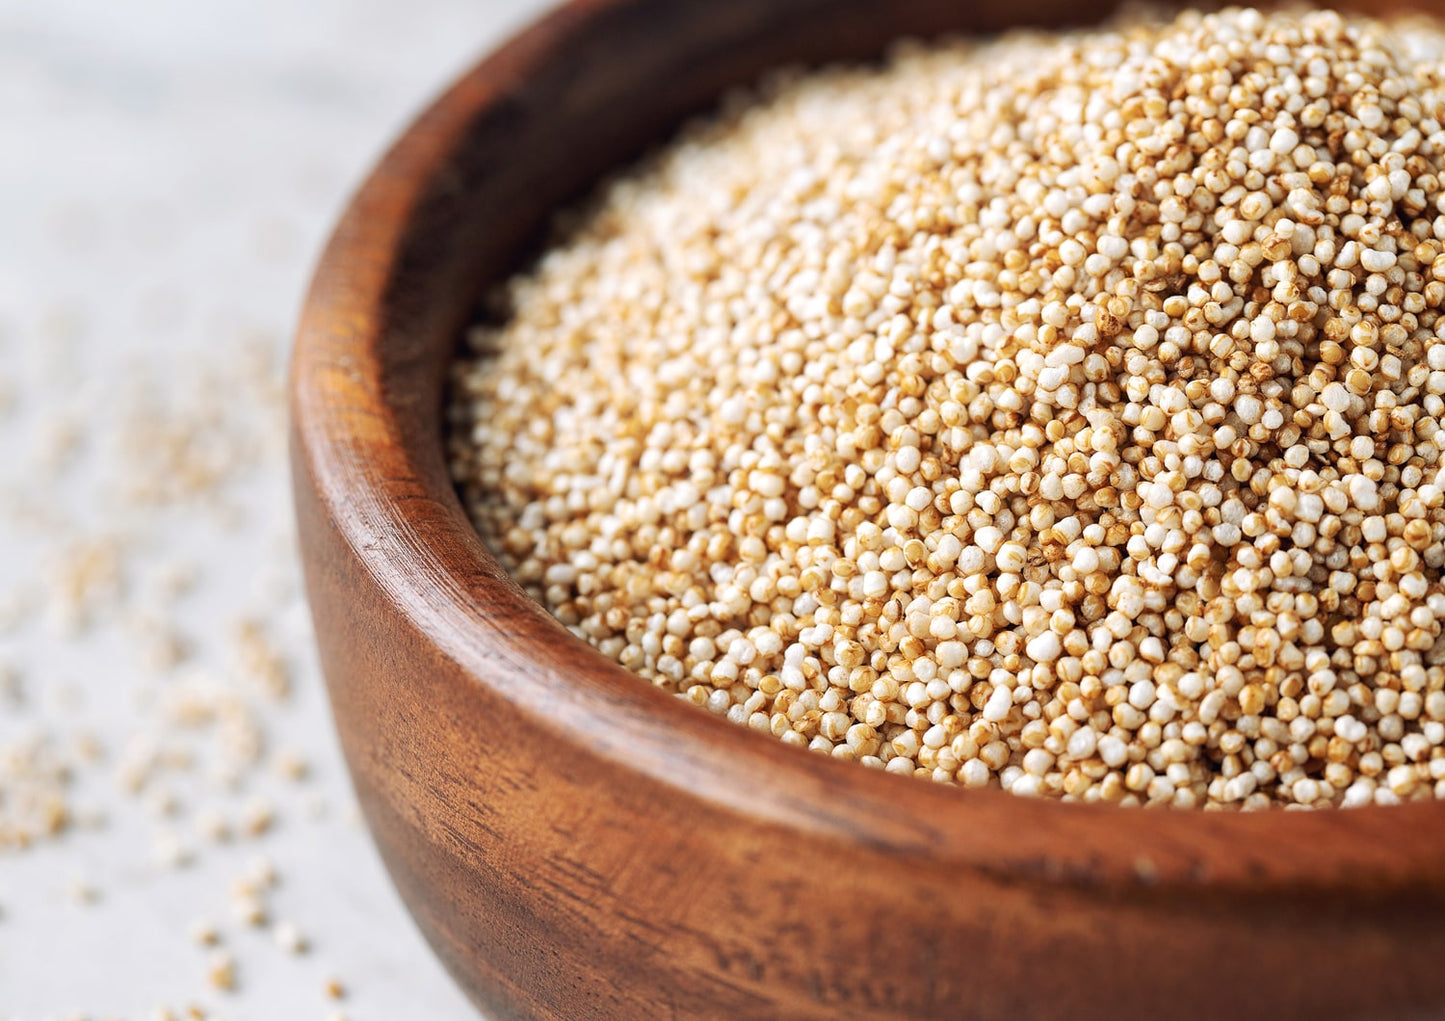 Organic Popped Amaranth, X Pounds – Non-GMO Puffed Seeds, No Sugar Added, Vegan, Bulk Grain. Good Source of Protein. Great Pop Snack. Perfect as Topping for Breakfast Cereal, Porridge, Yogurt